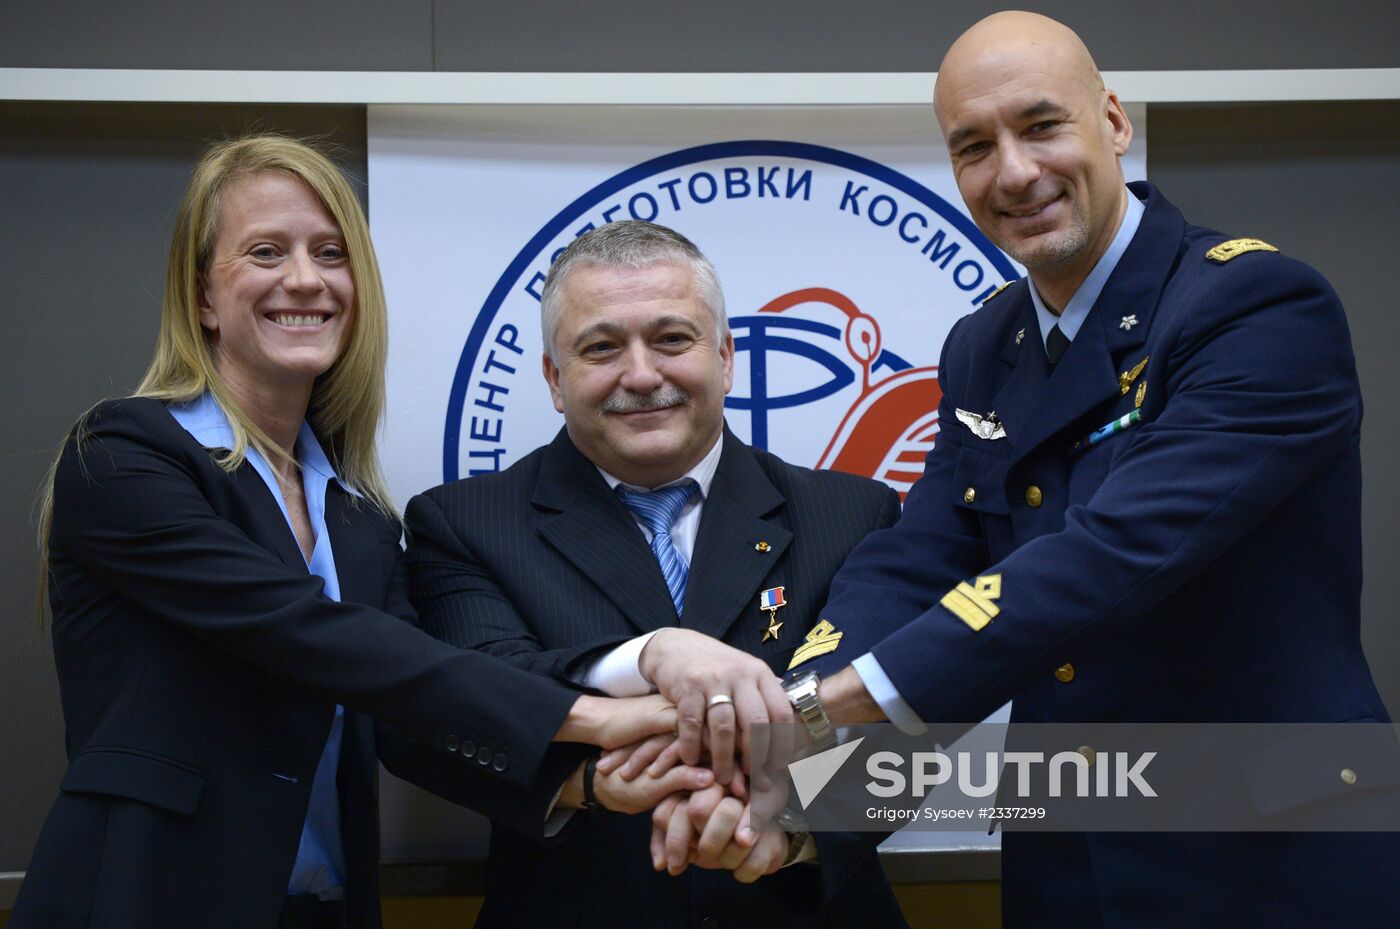 News conference on welcoming ISS Expedition 37 crew members and Olympic torch back on Earth